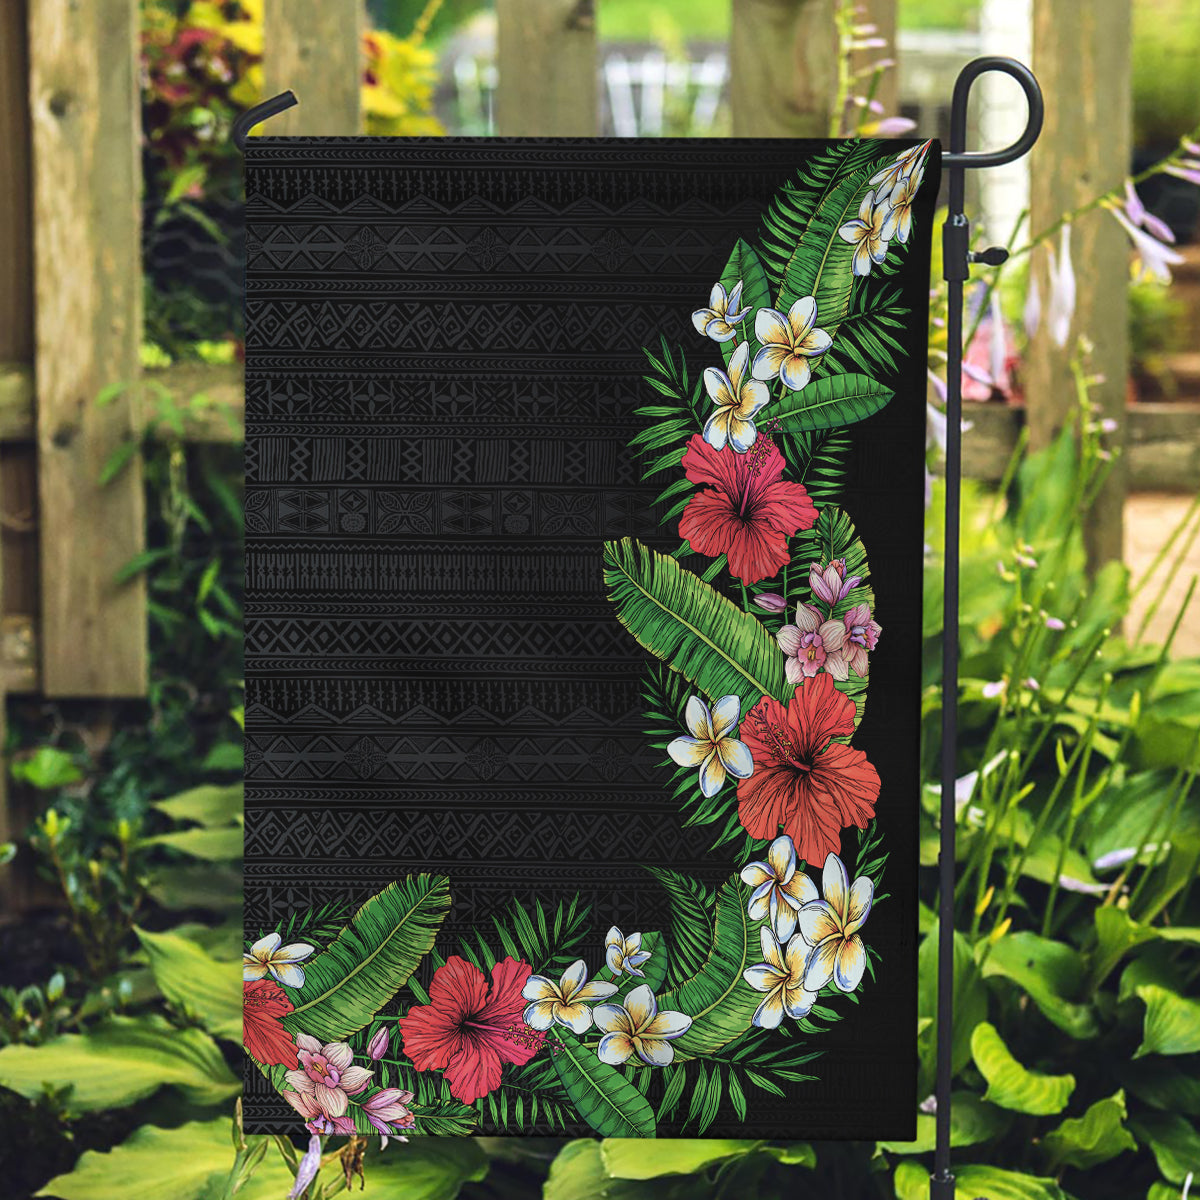 Hawaii Tropical Flowers and Leaves Garden Flag Tapa Pattern Colorful Mode